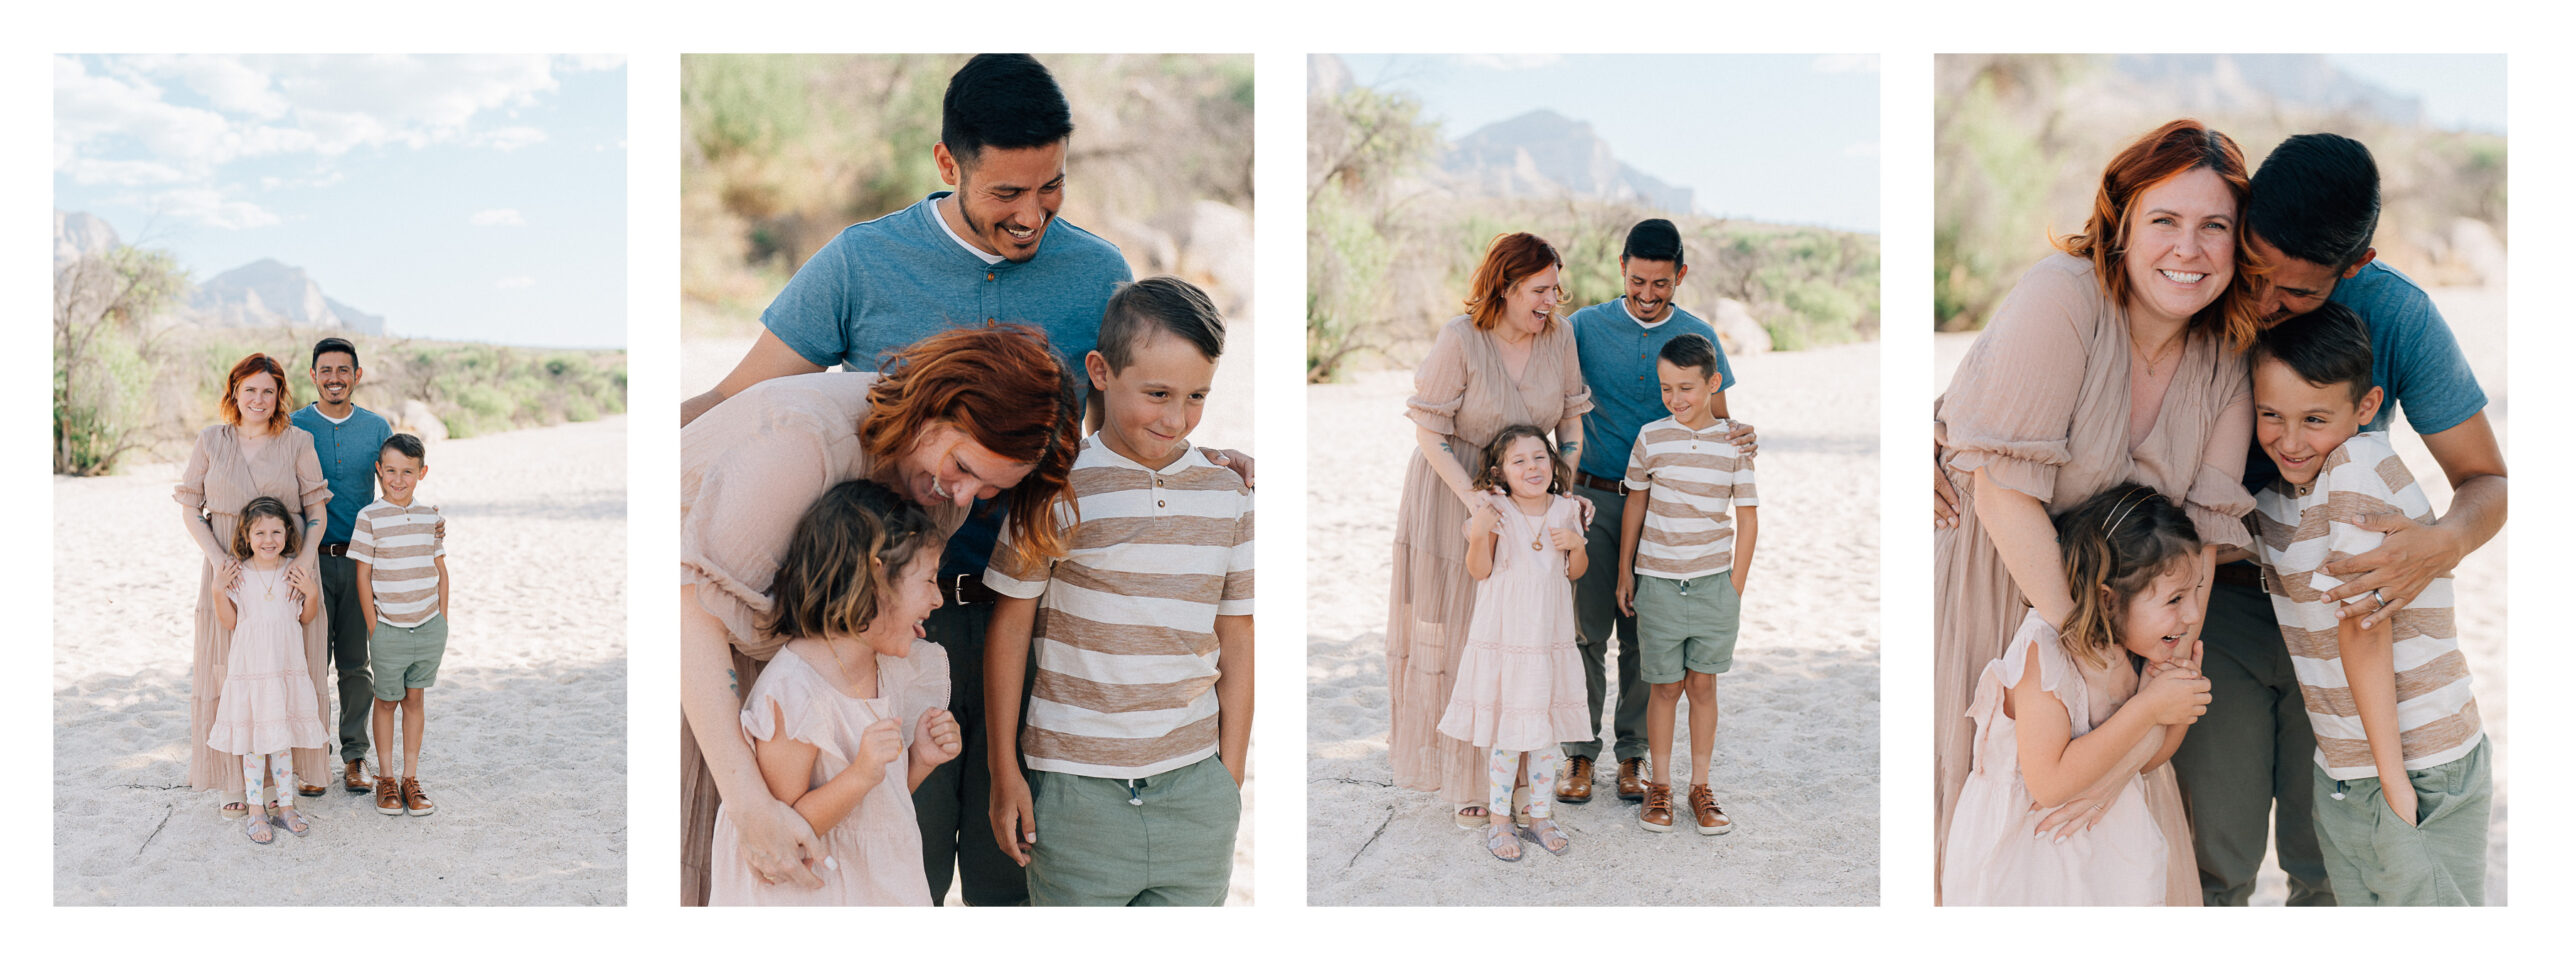 tucson photography for family and mini sessions